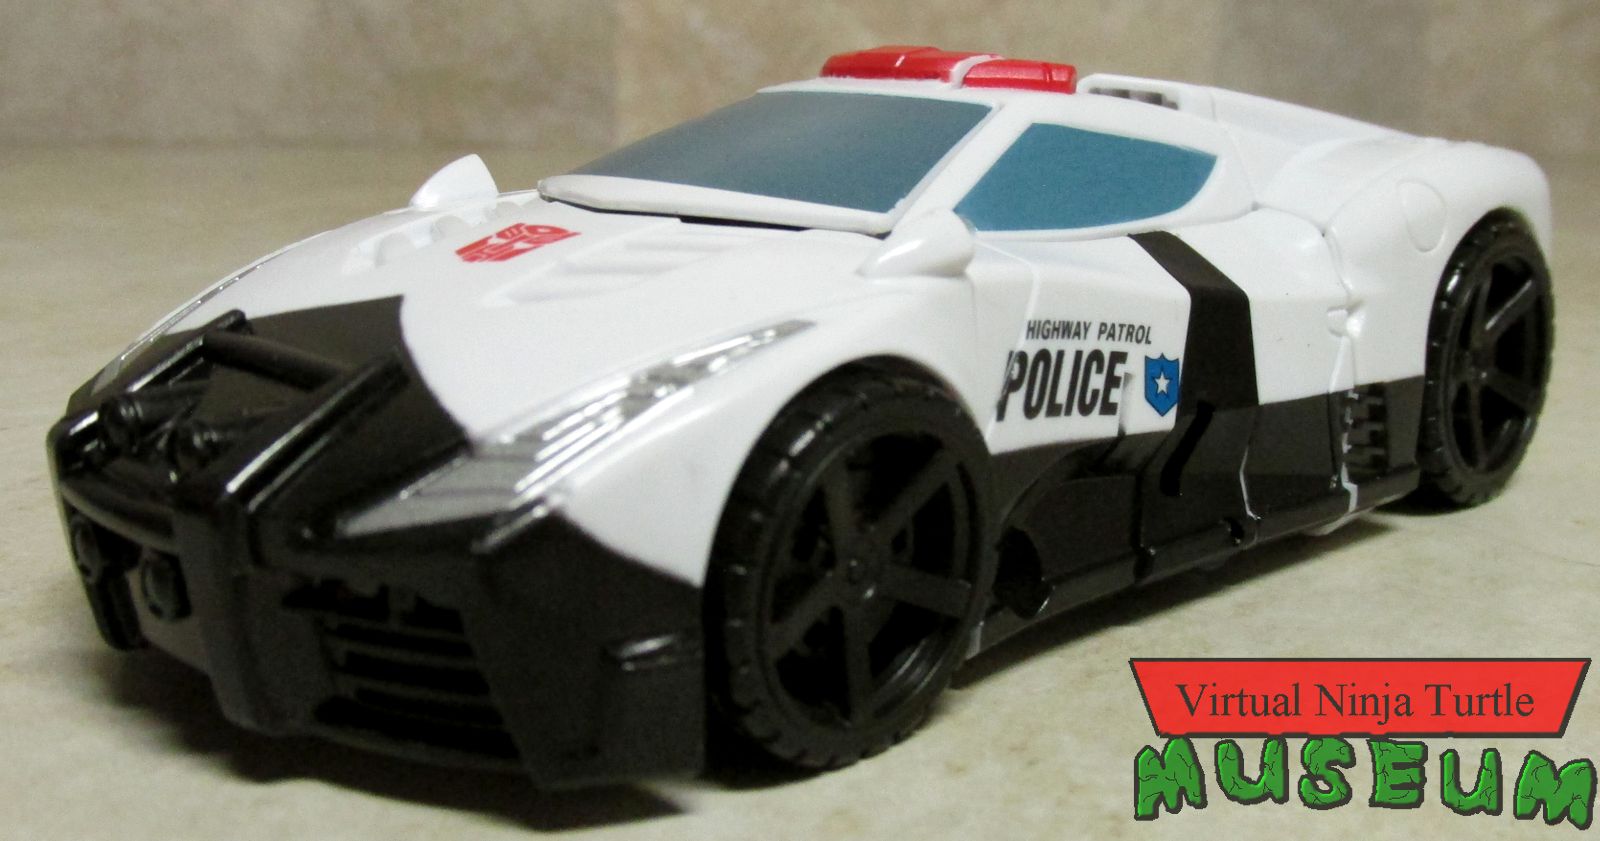 Prowl vehicle mode front view